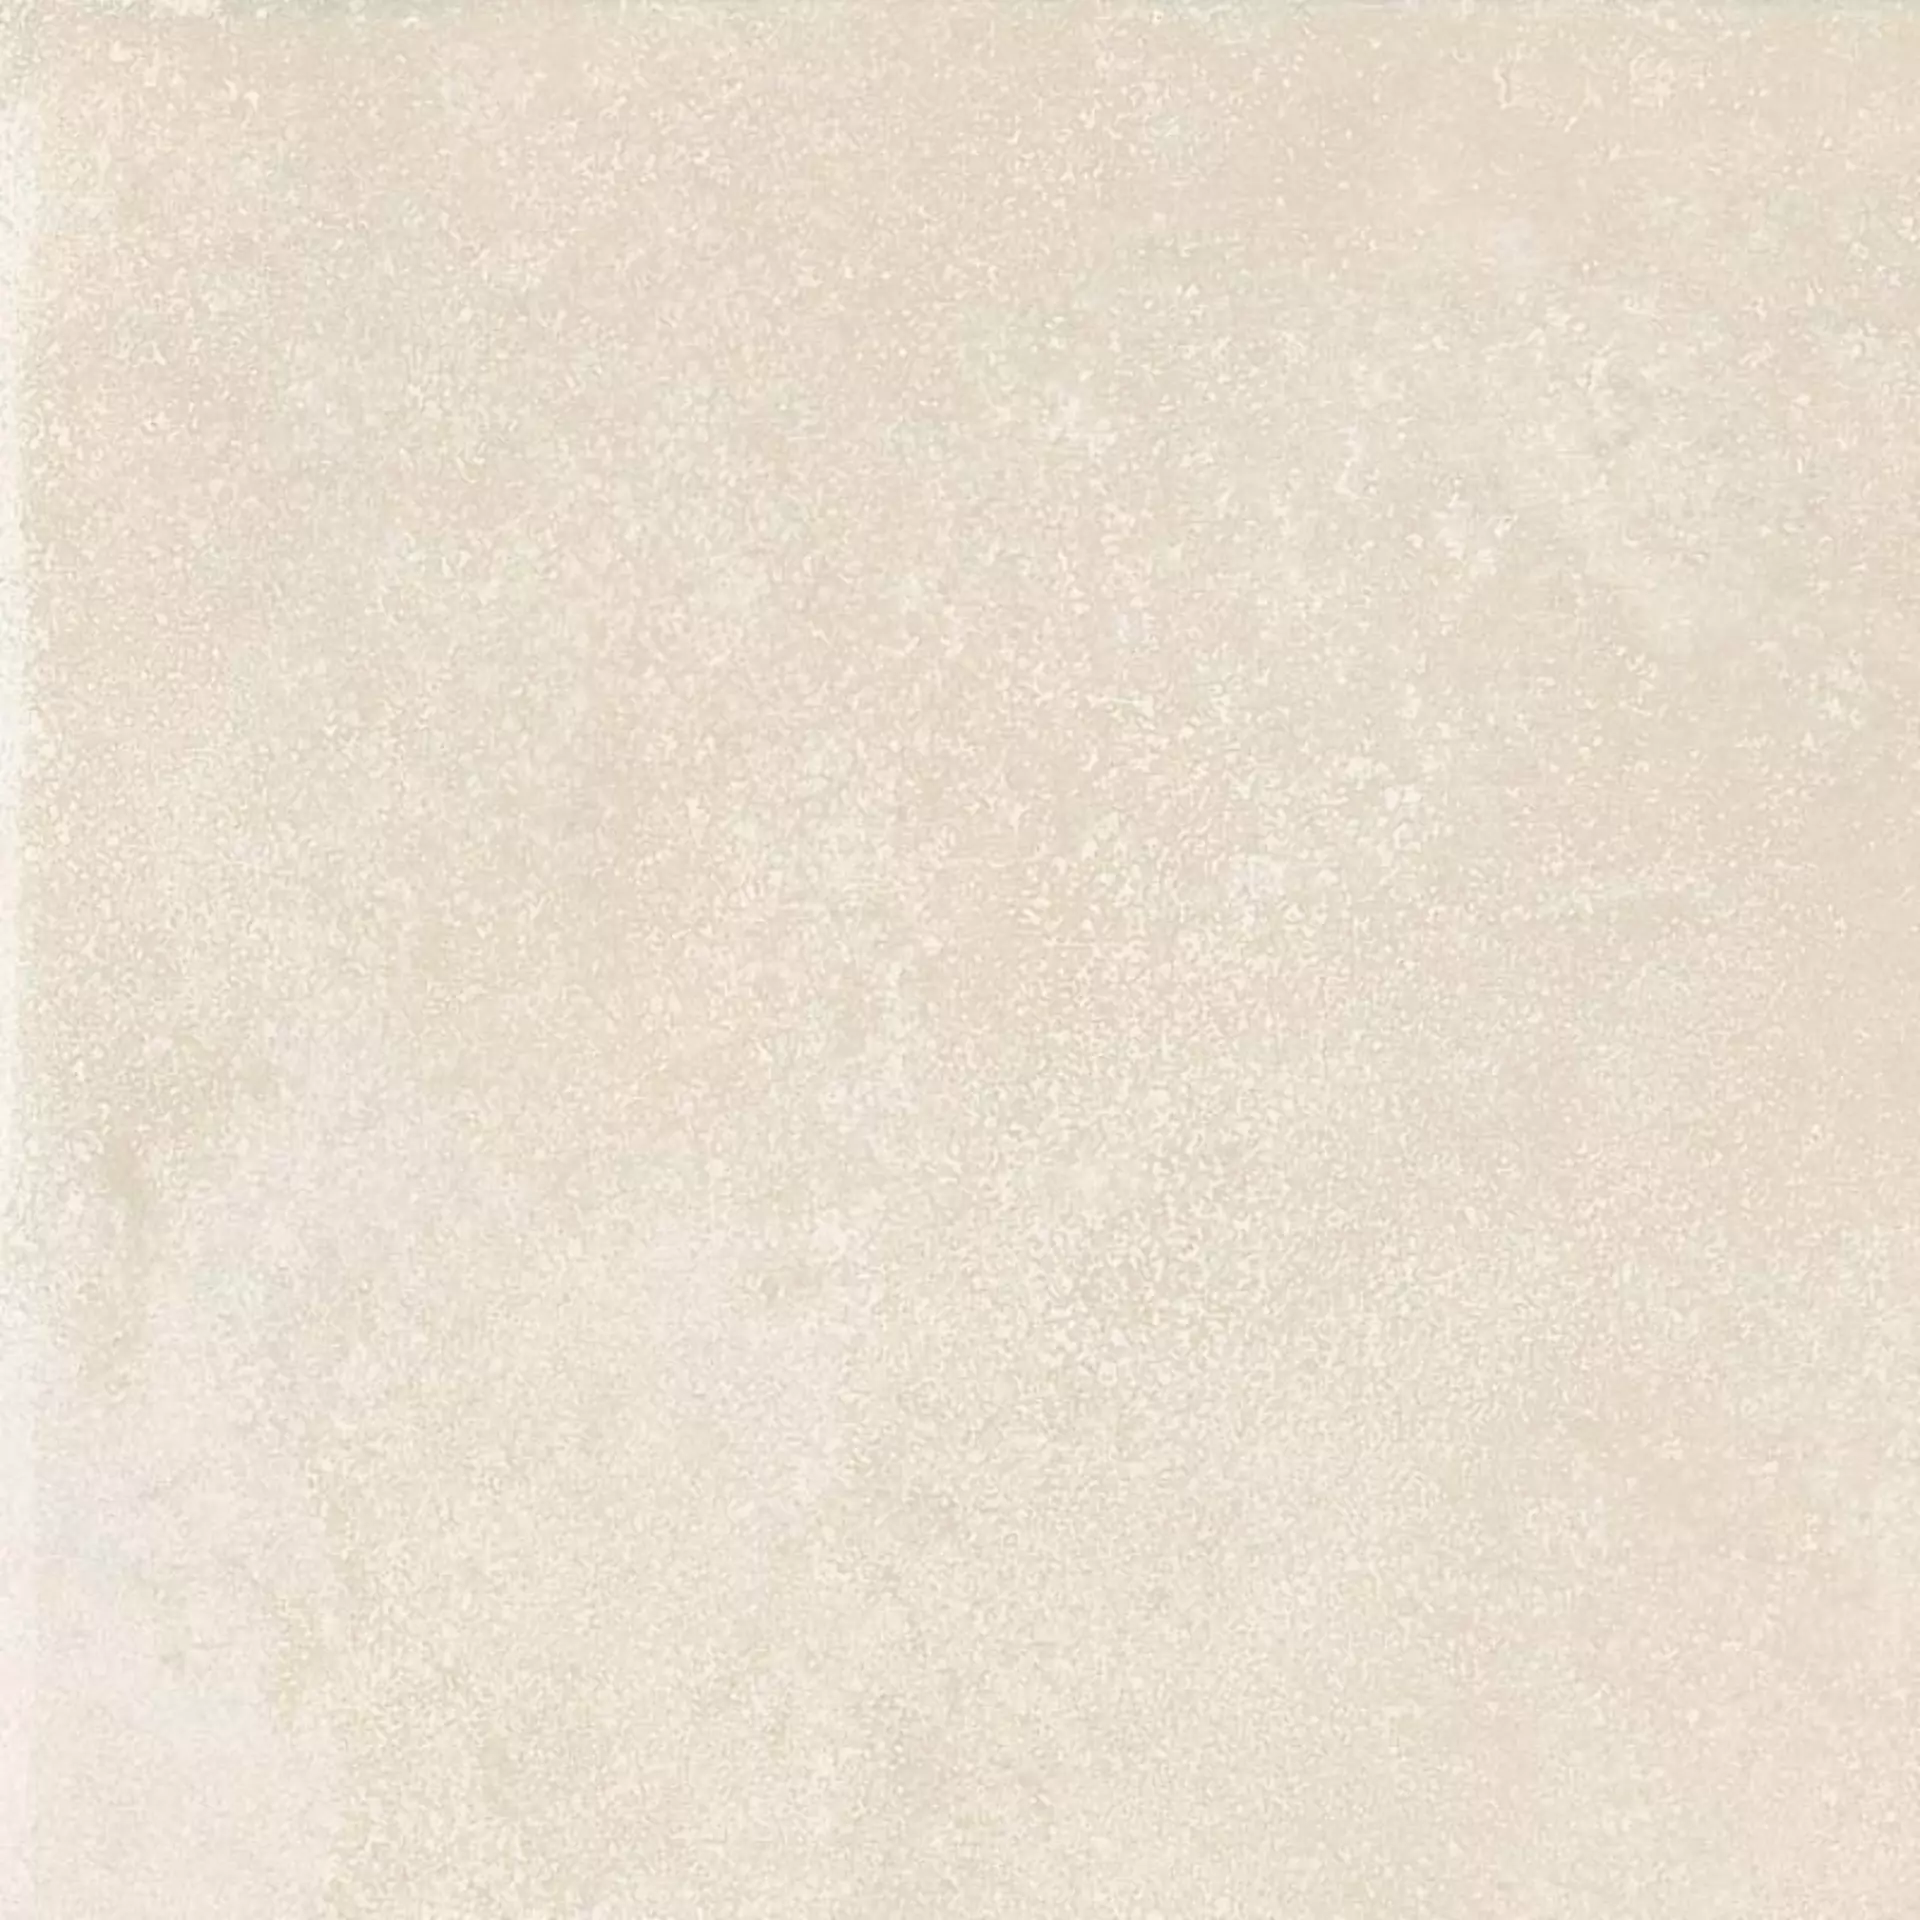 Sant Agostino Via Appia Ivory Natural CSAACCIV60 60x60cm rectified 10mm